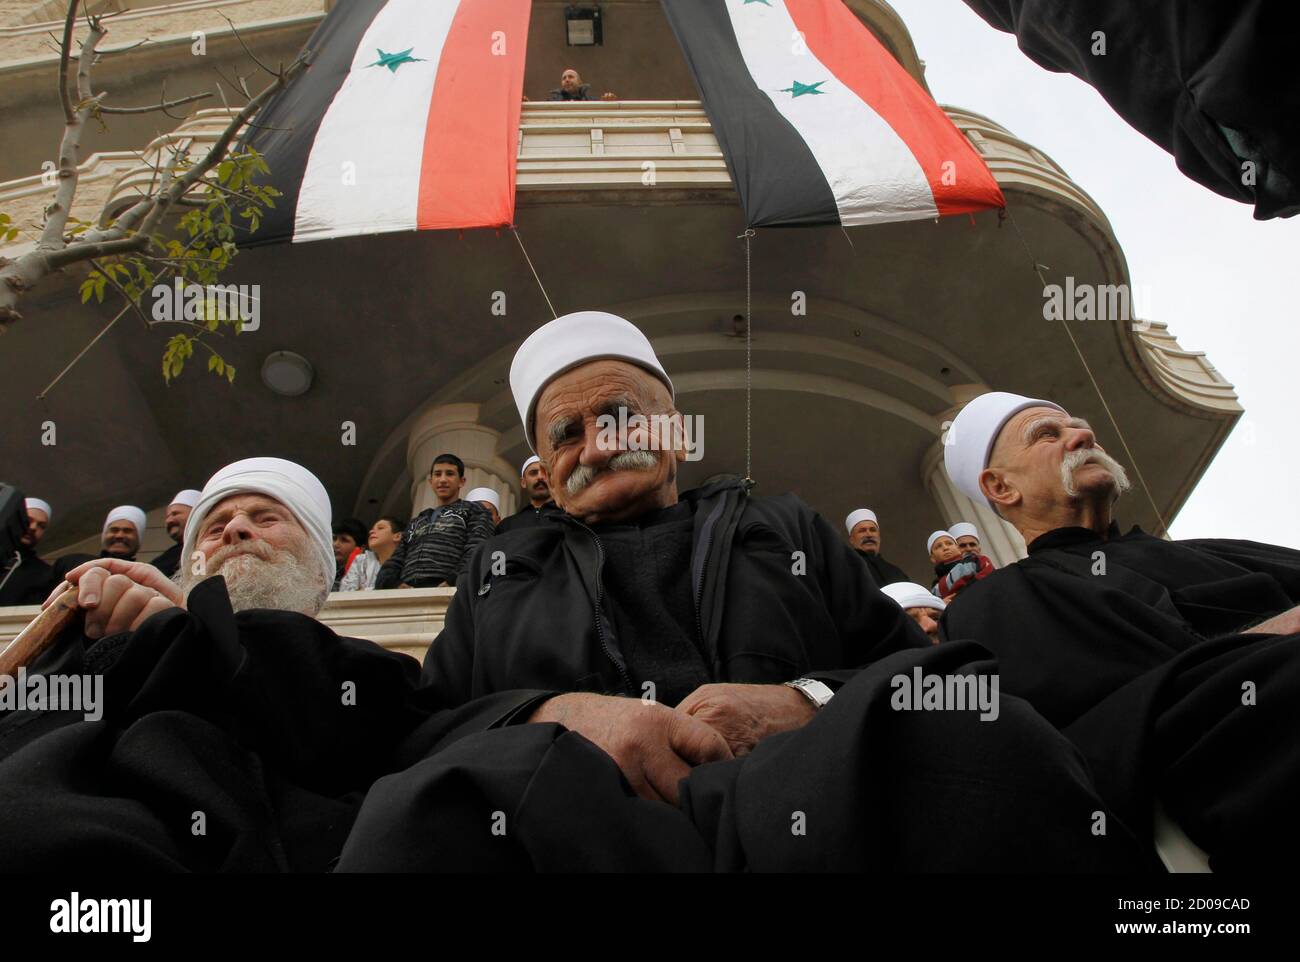 Members of the Druze community sit under Syrian flags during a rally in the Druze village of Majdal Shams on the Golan Heights, which stand at the heart of a long-standing conflict between Israel and Syria, February 14, 2012. Hundreds of members of the Druze community took part in the rally on Tuesday, marking the 31st anniversary of Israel's annexation of the strategic plateau which it captured in the 1967 Middle East War. REUTERS/Baz Ratner (CIVIL UNREST POLITICS ANNIVERSARY) Stock Photo